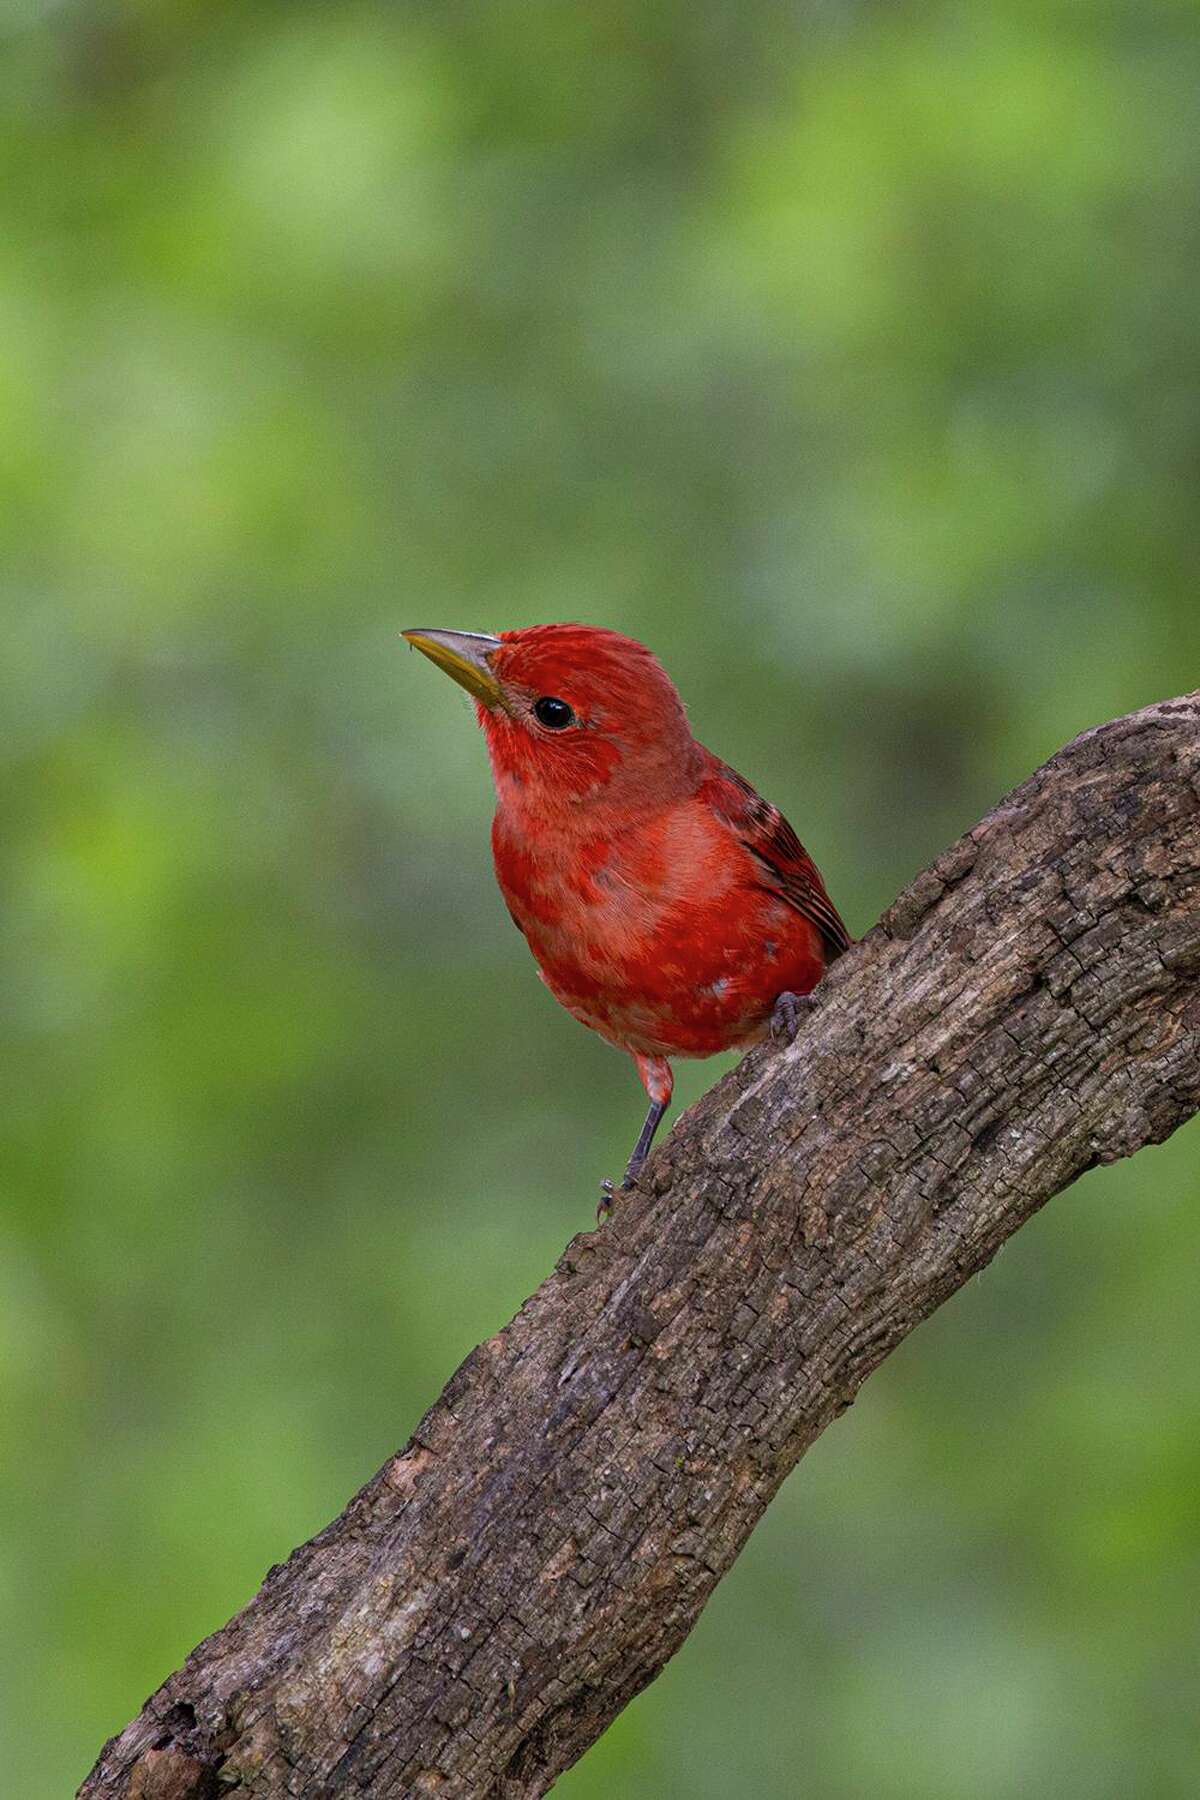 Summer tanagers are nesting in the area. Look for the red male with a bone colored beak.